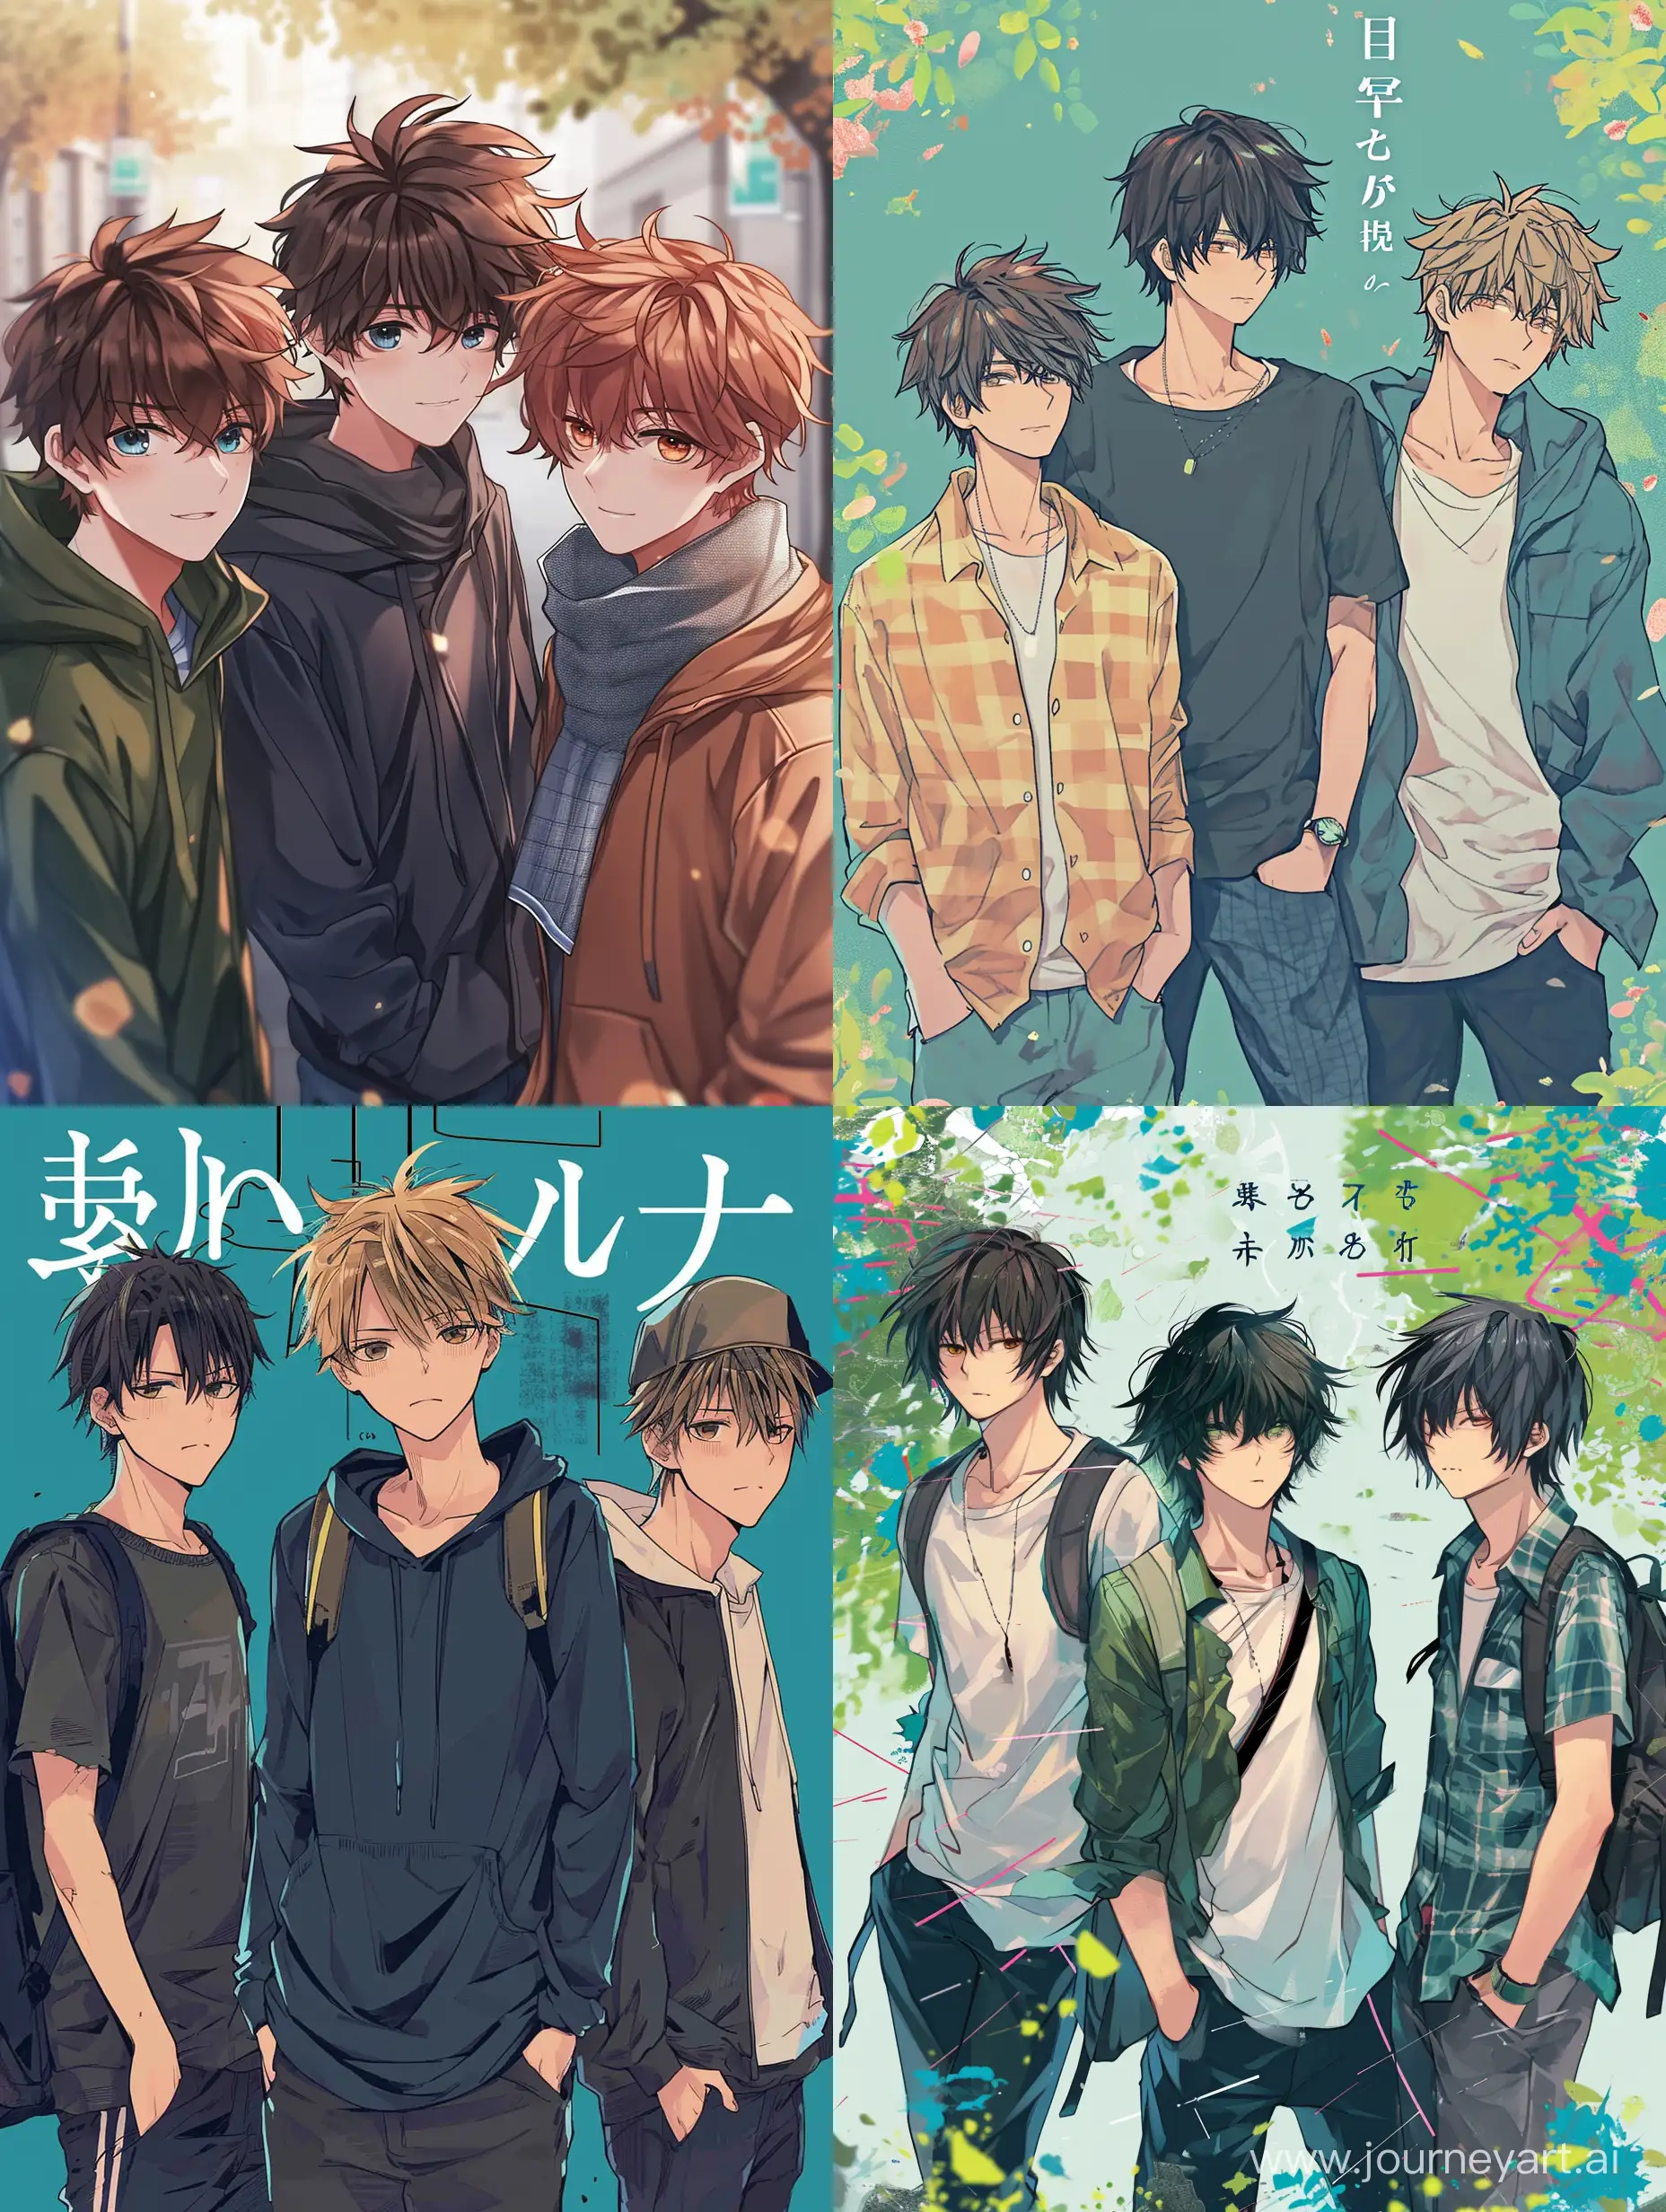 The anime style, the cover for manga, three boys. 